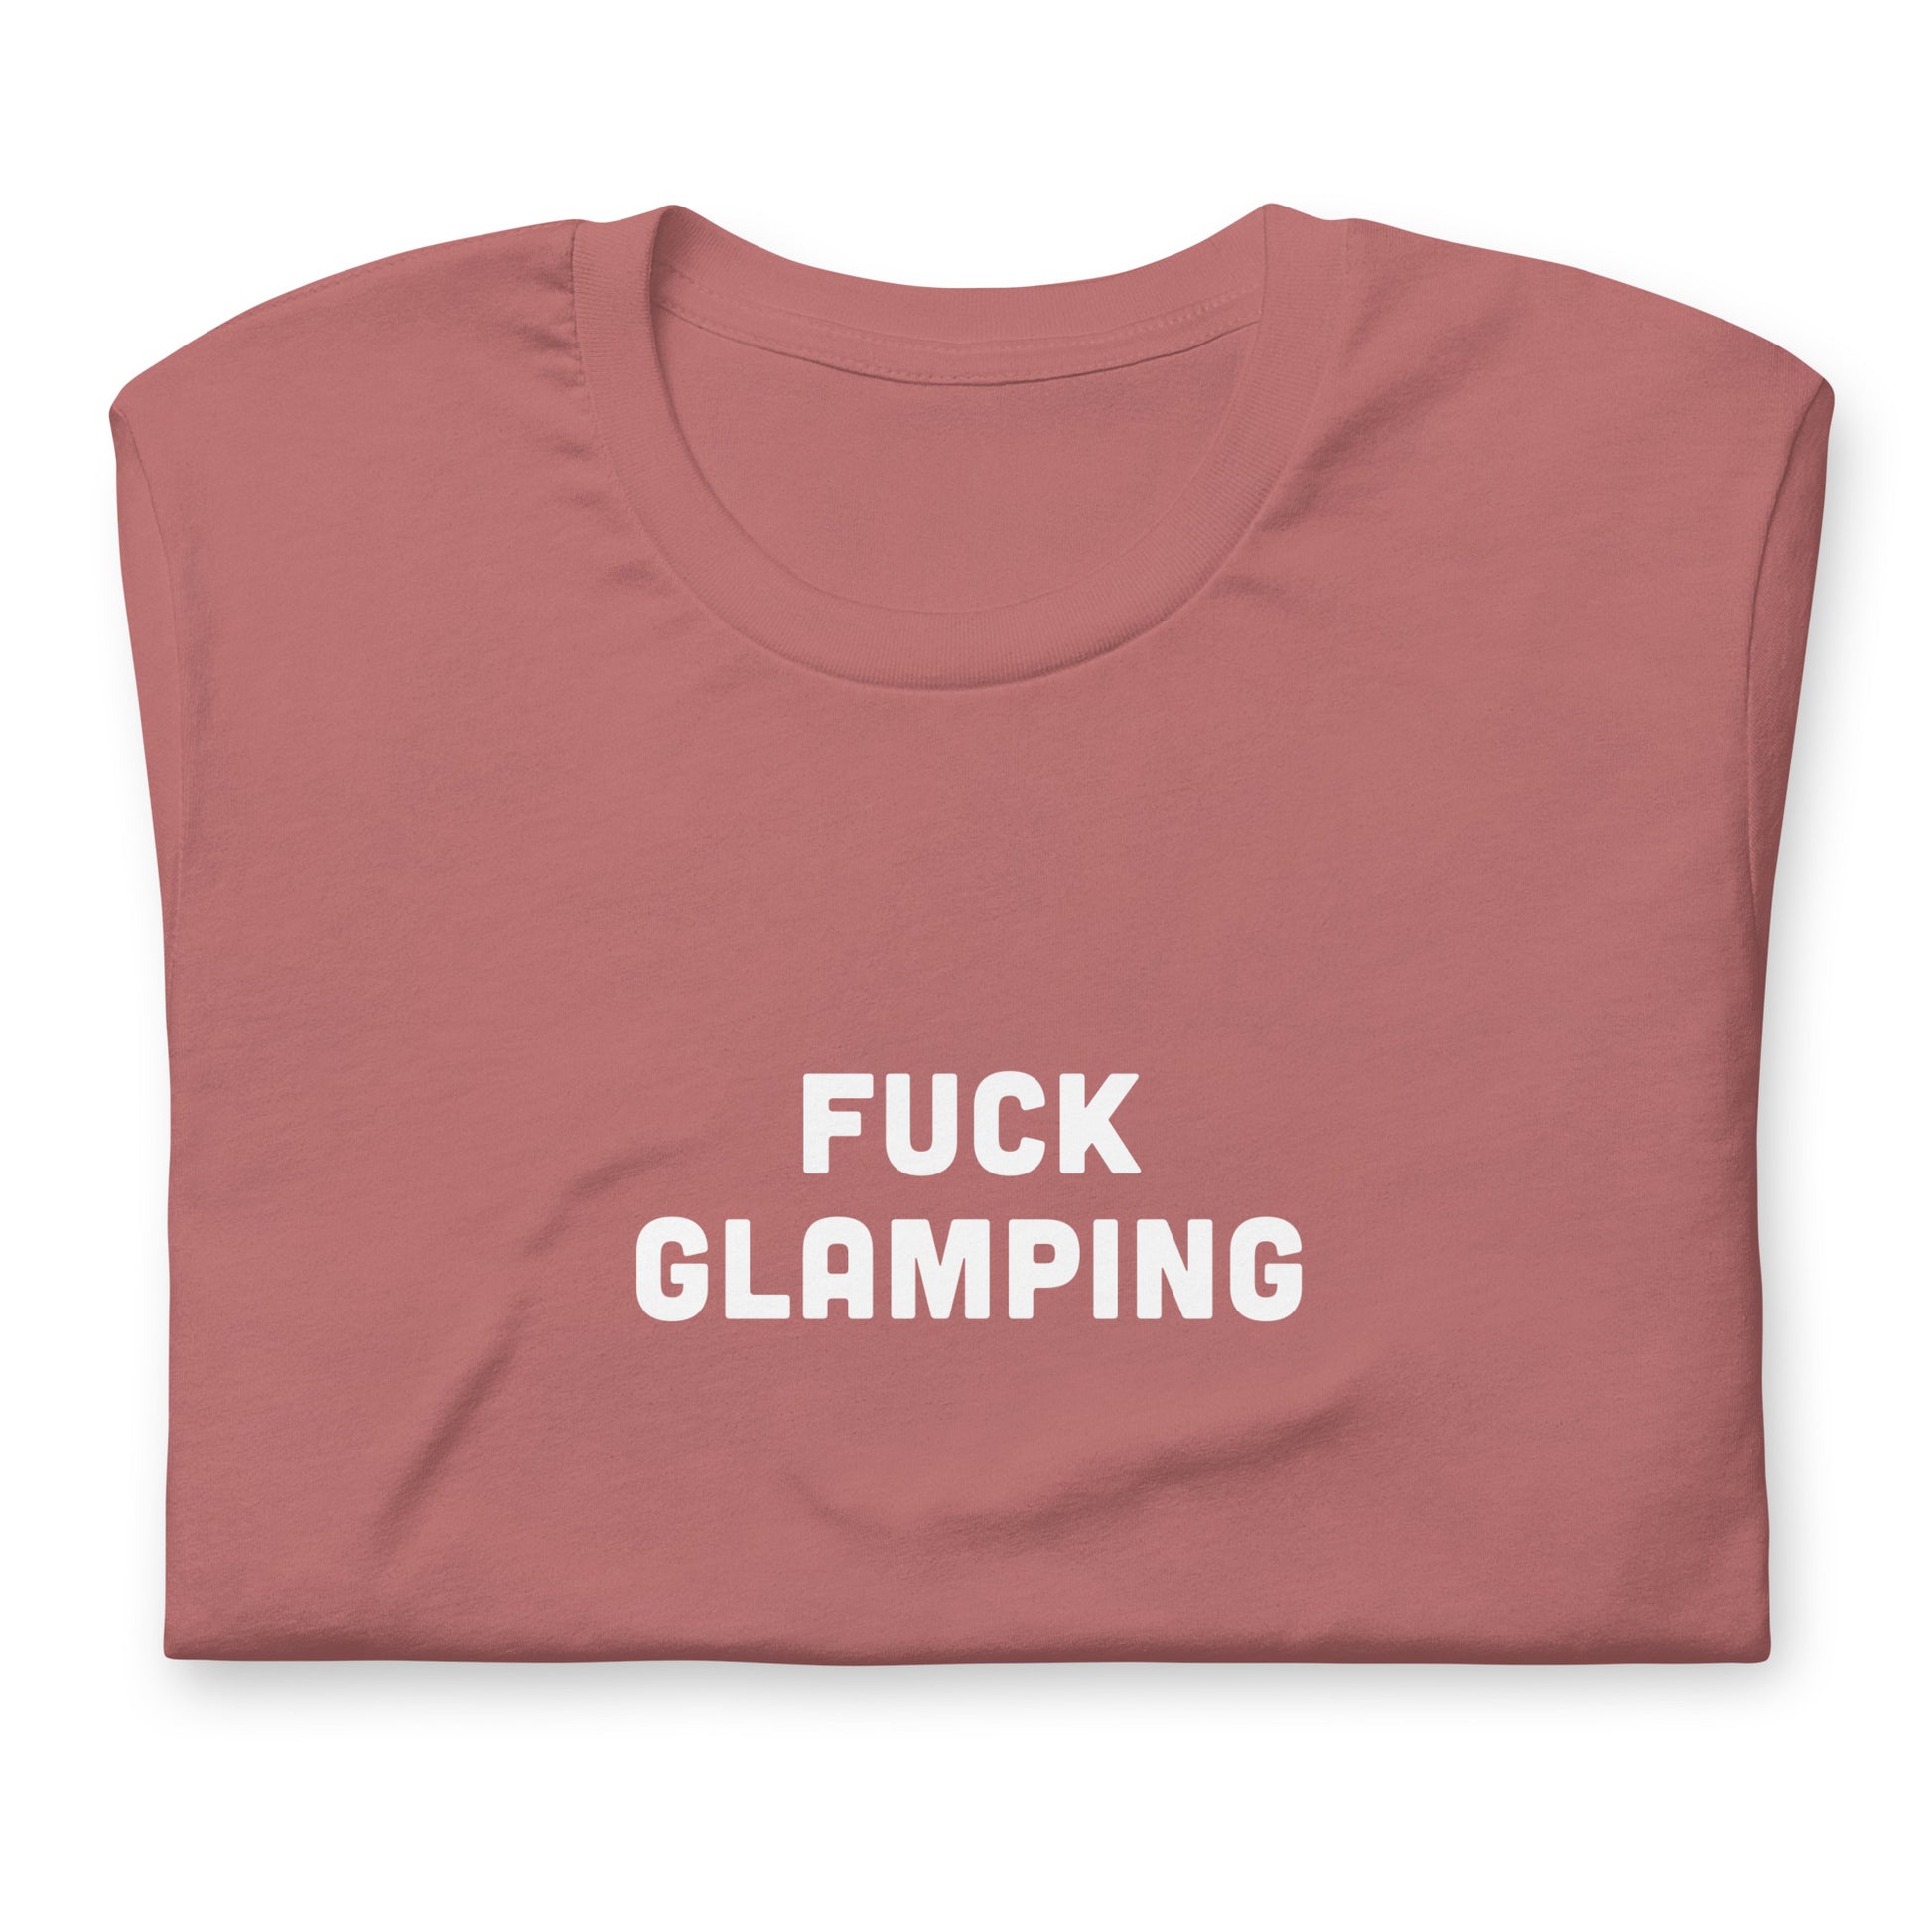 Fuck Glamping T-Shirt Size XL Color Navy